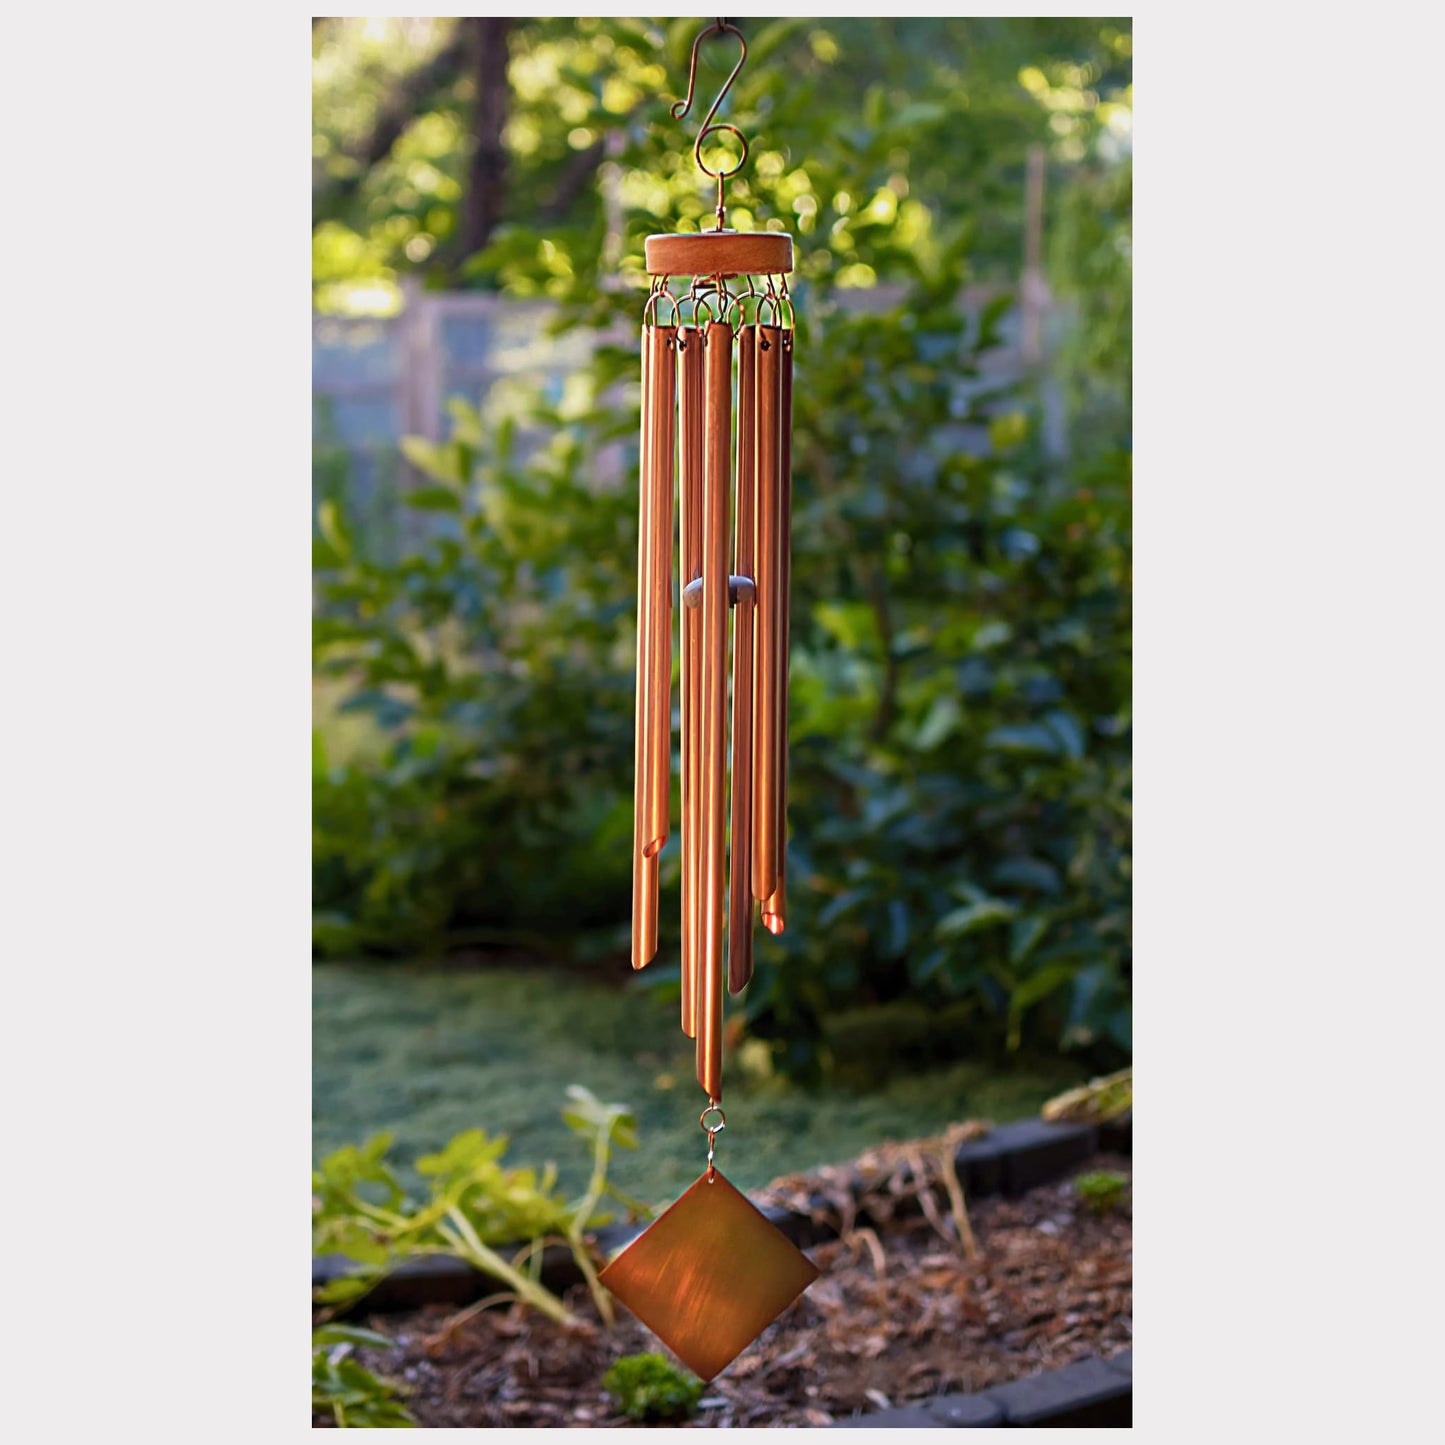 Outdoor large real copper wind chime with seven chimes.